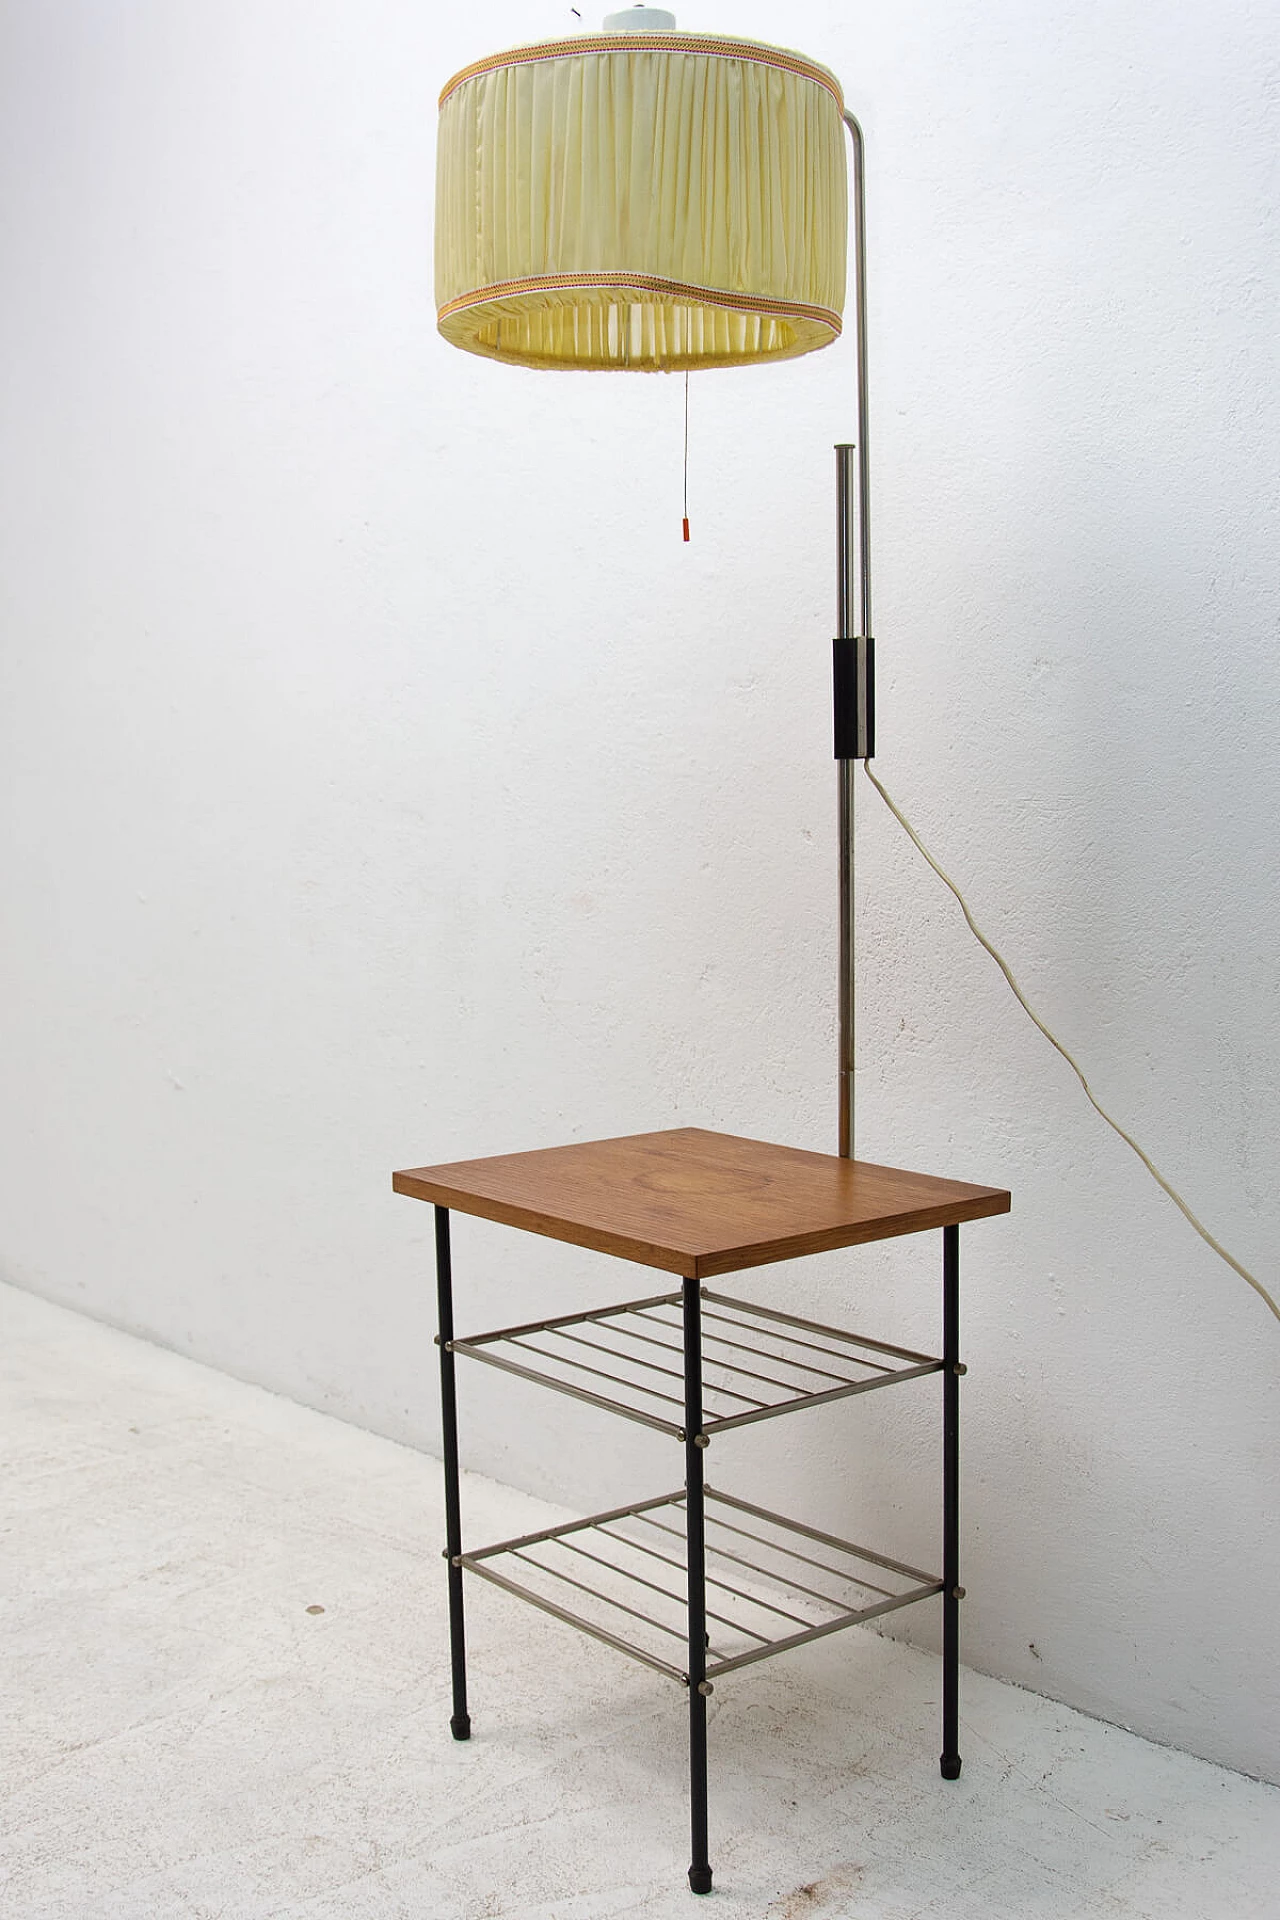 Floor lamp with storage compartment, 1970s 1364358